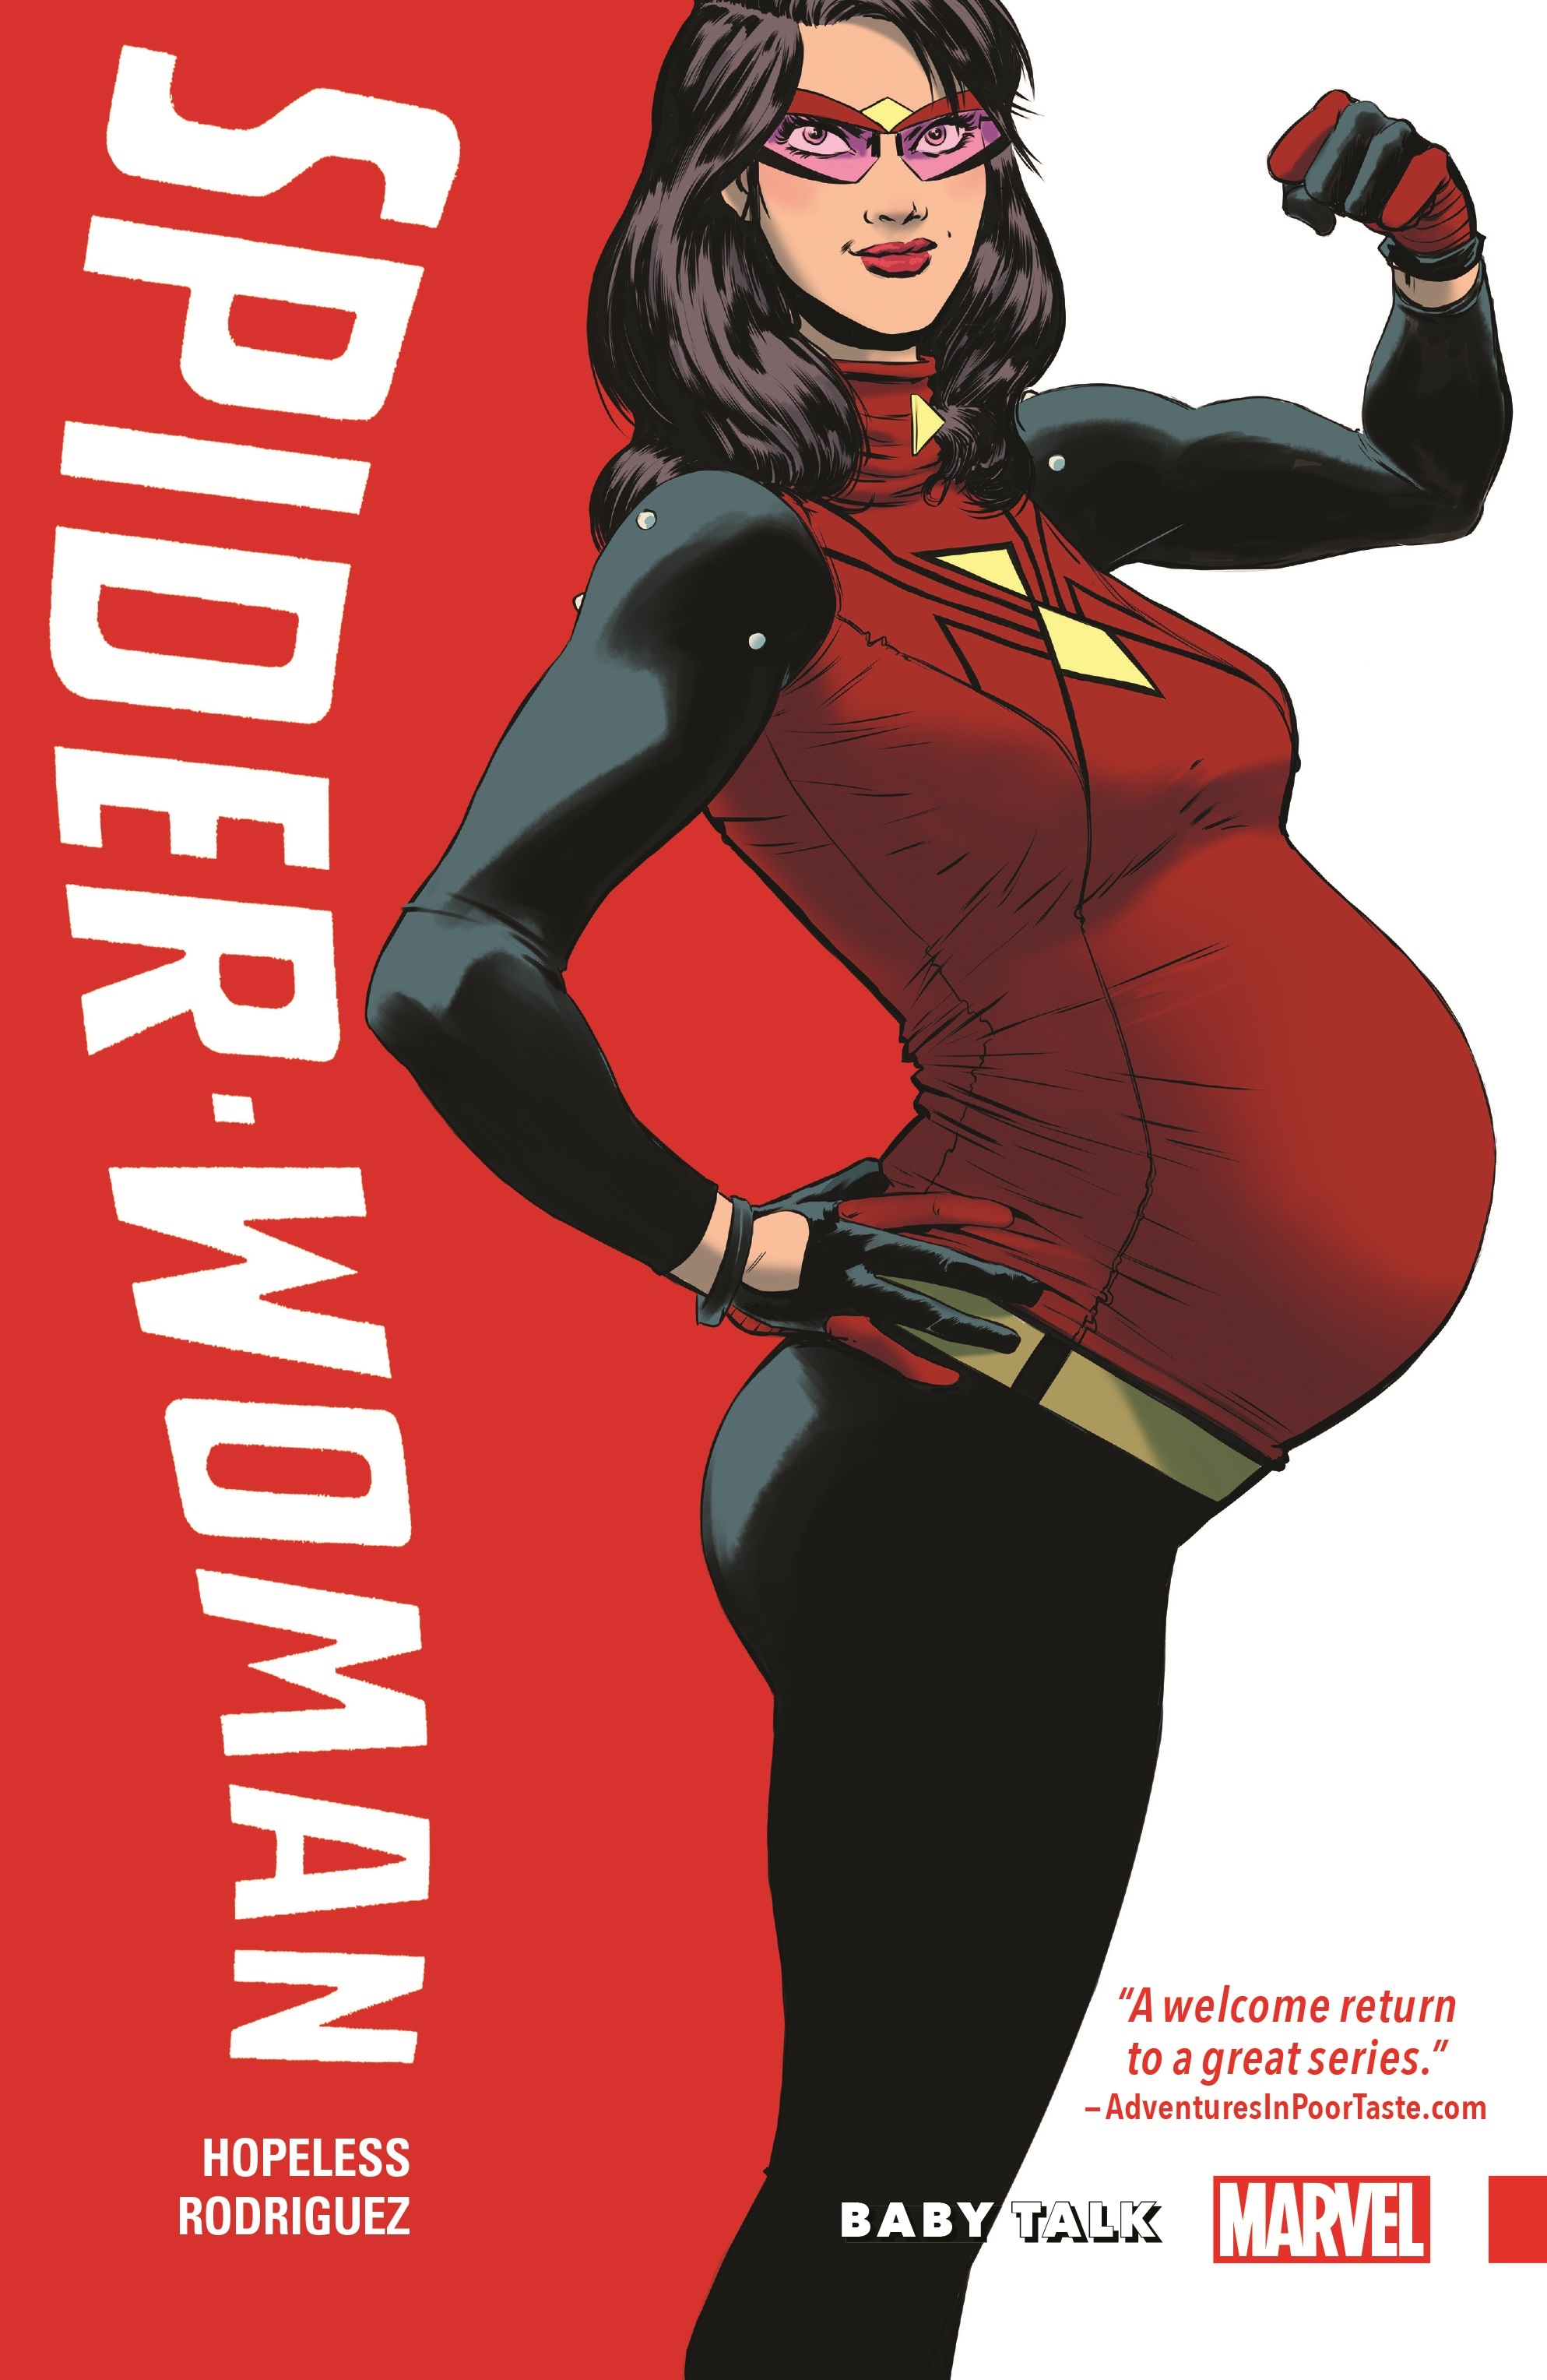 Spider-Woman: Shifting Gears Vol. 1 - Baby Talk (Trade Paperback)